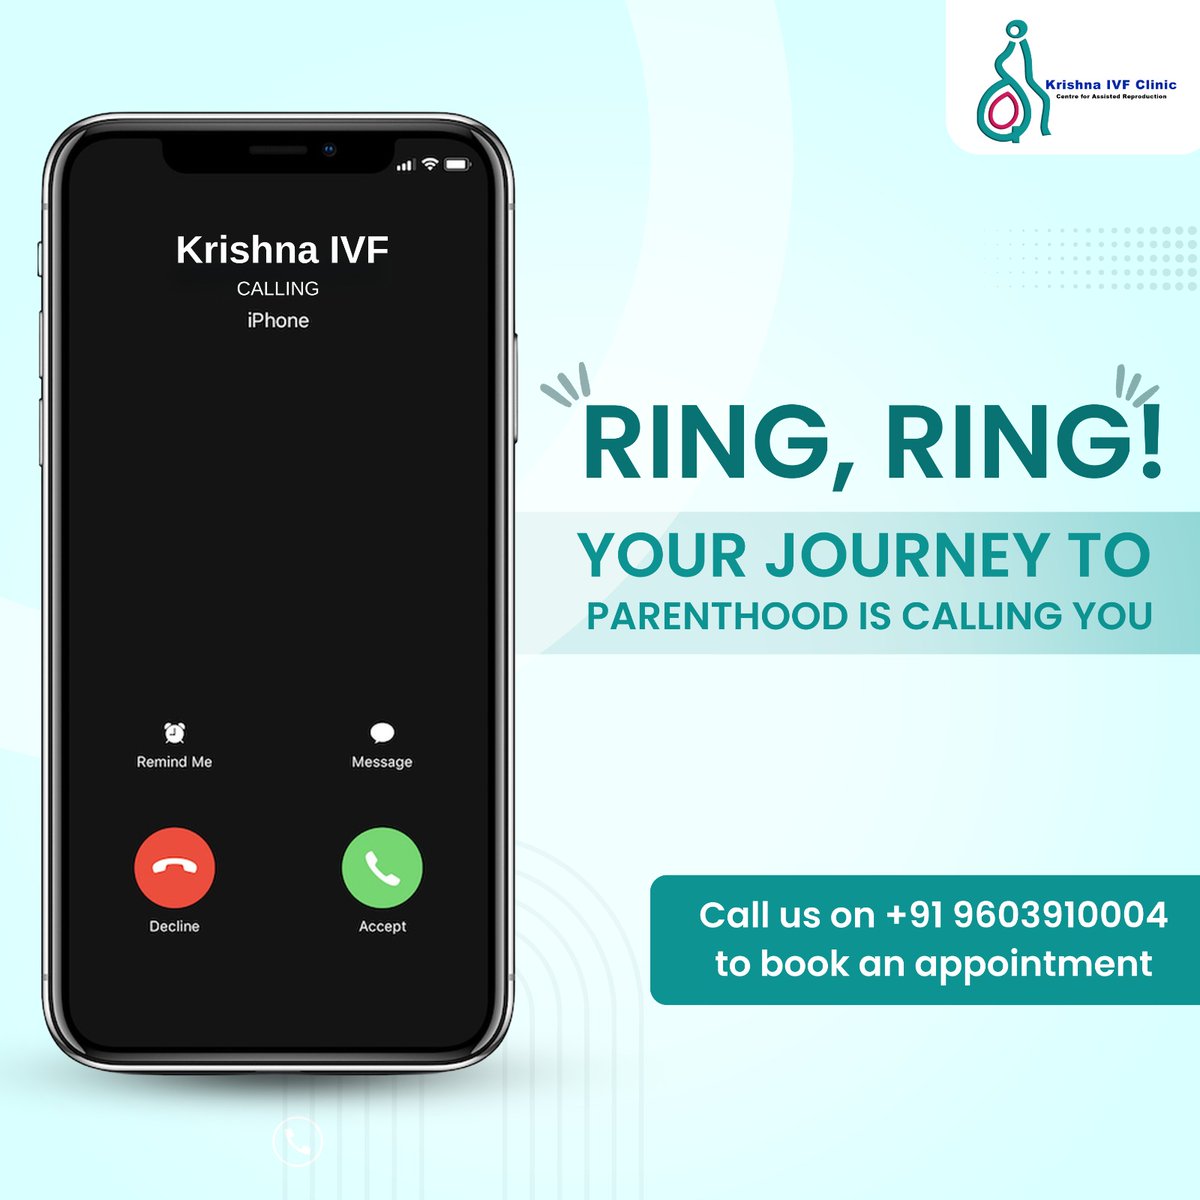 Your journey to parenthood is calling, and with IVF. Let's embark together on the path to new beginnings, turning dreams into reality.

To book an appointment today call us on +91 9603910004

#krishnaivf #Ivf #ivfcentre #fertility #ivfhospital #family #ivfsuccess #parents